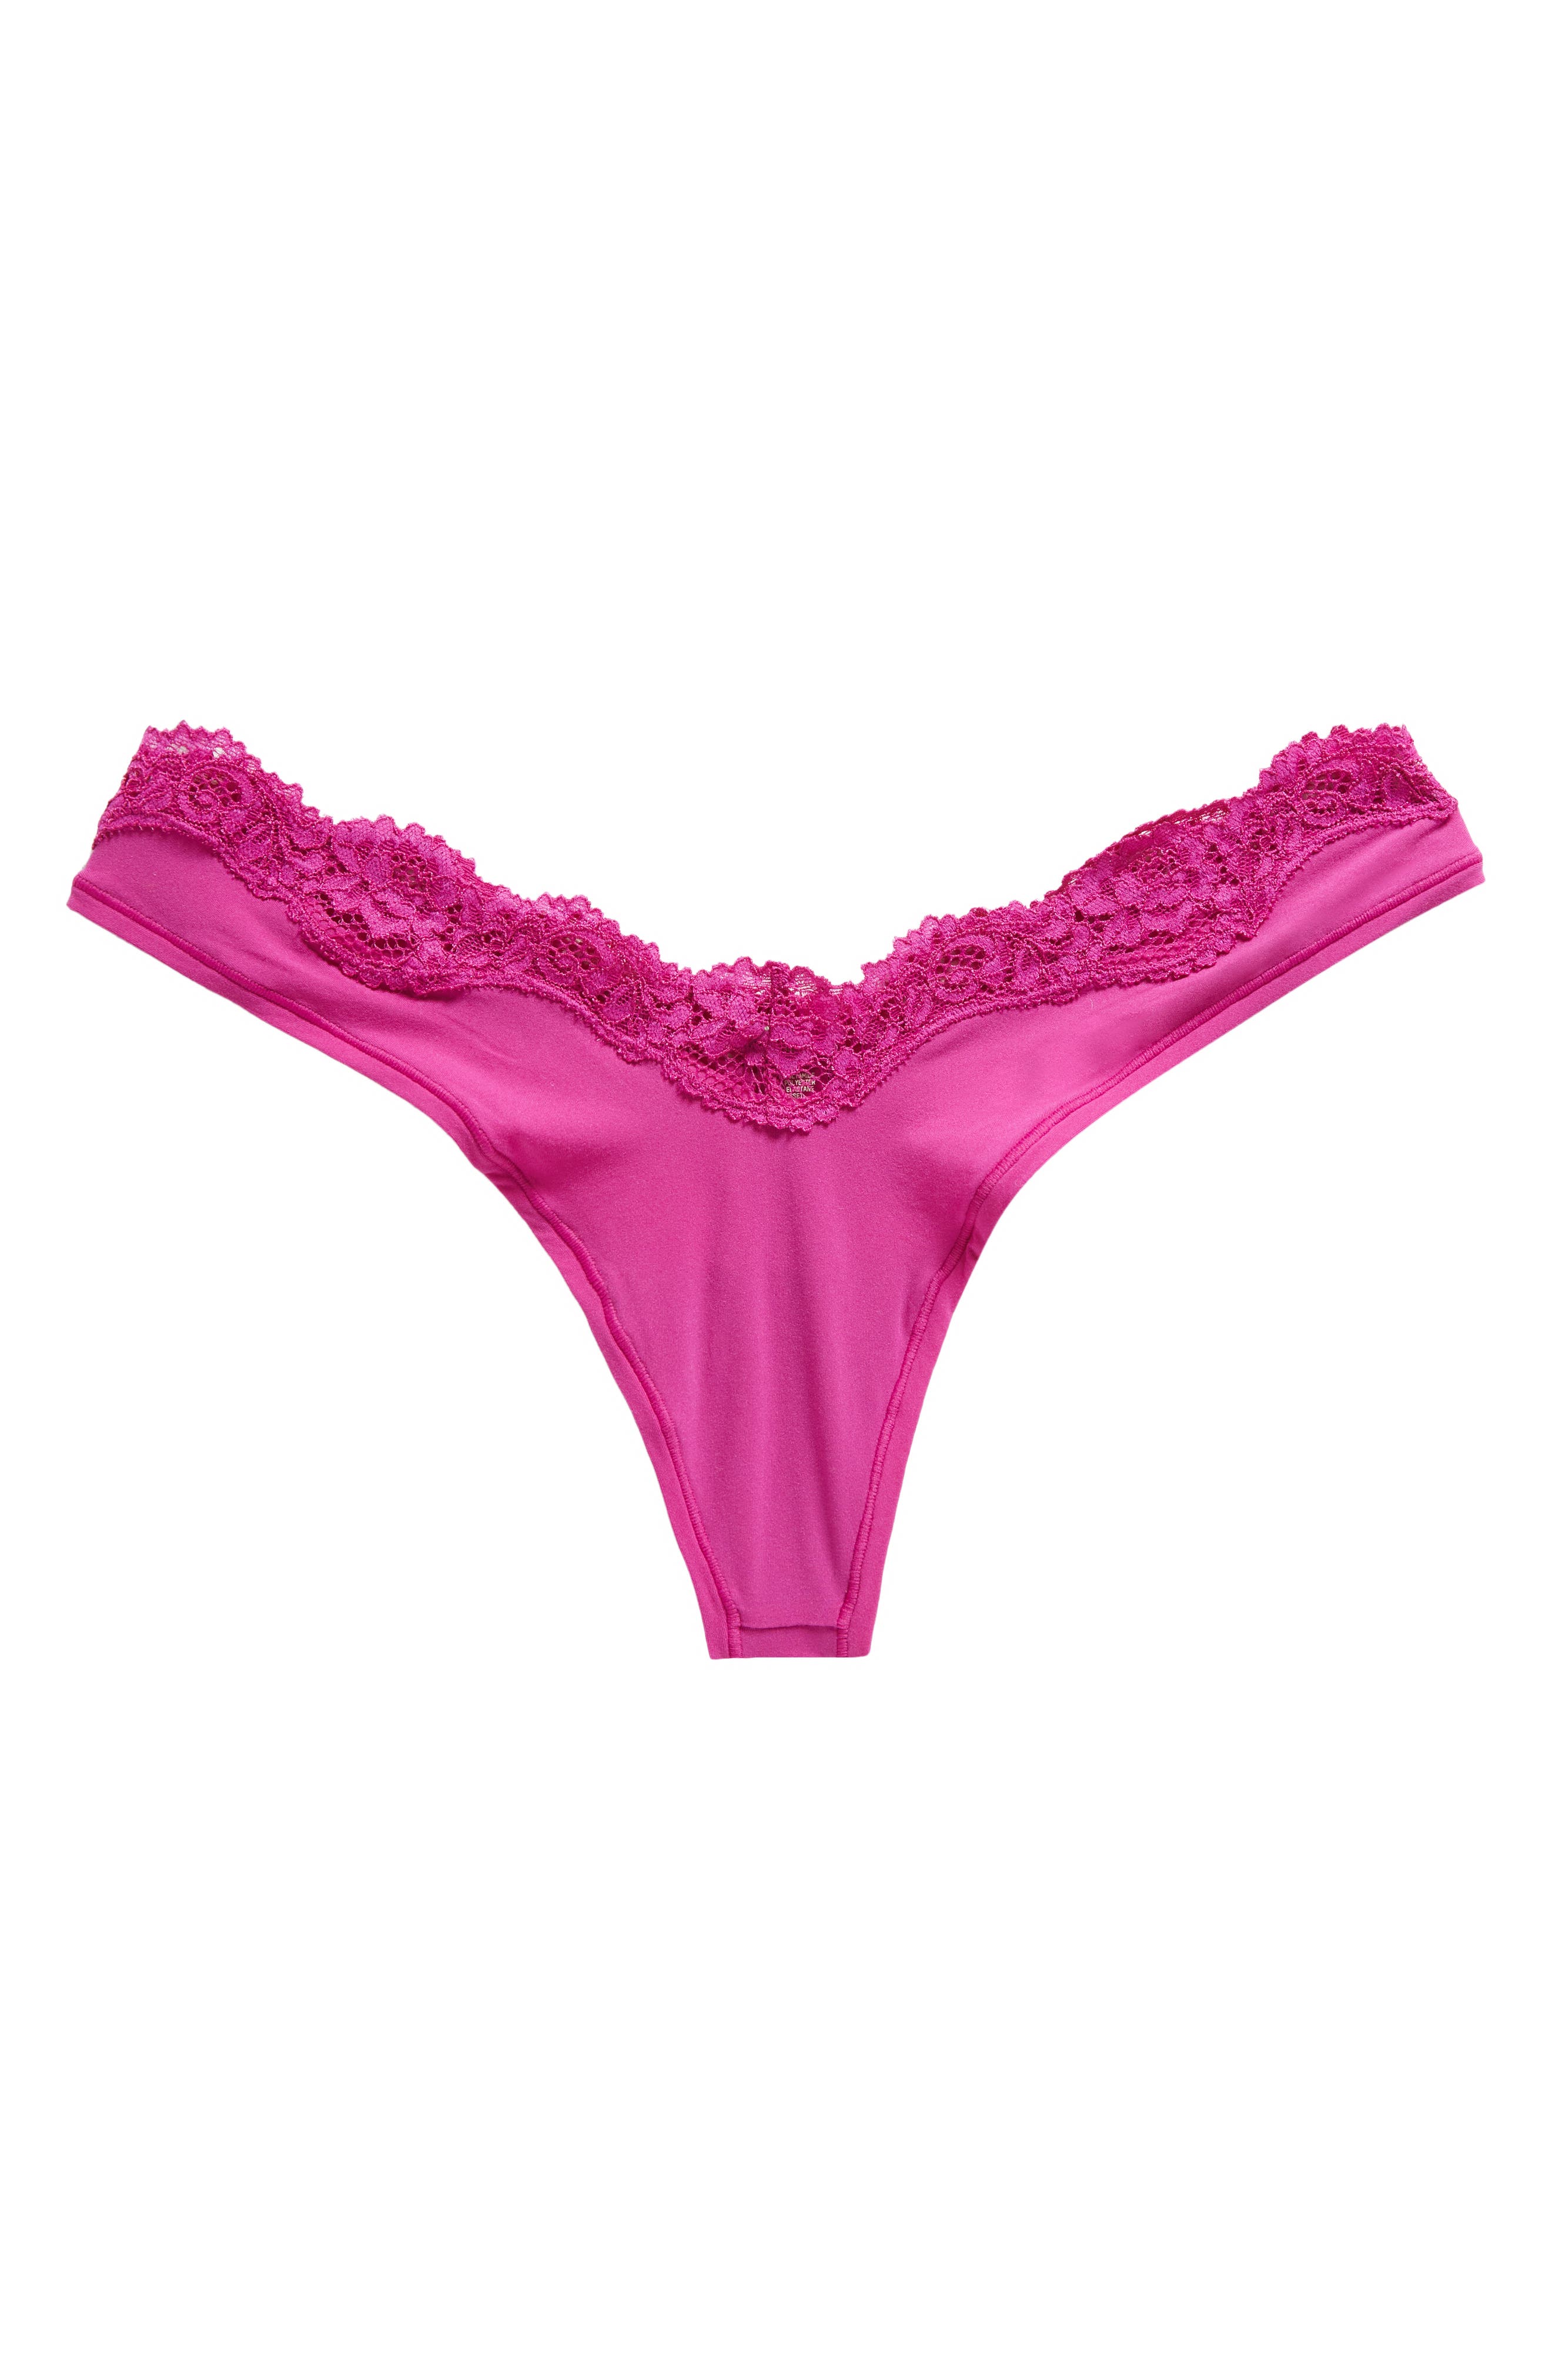 Skims Lace-Trim Fits Everybody Dipped Thong